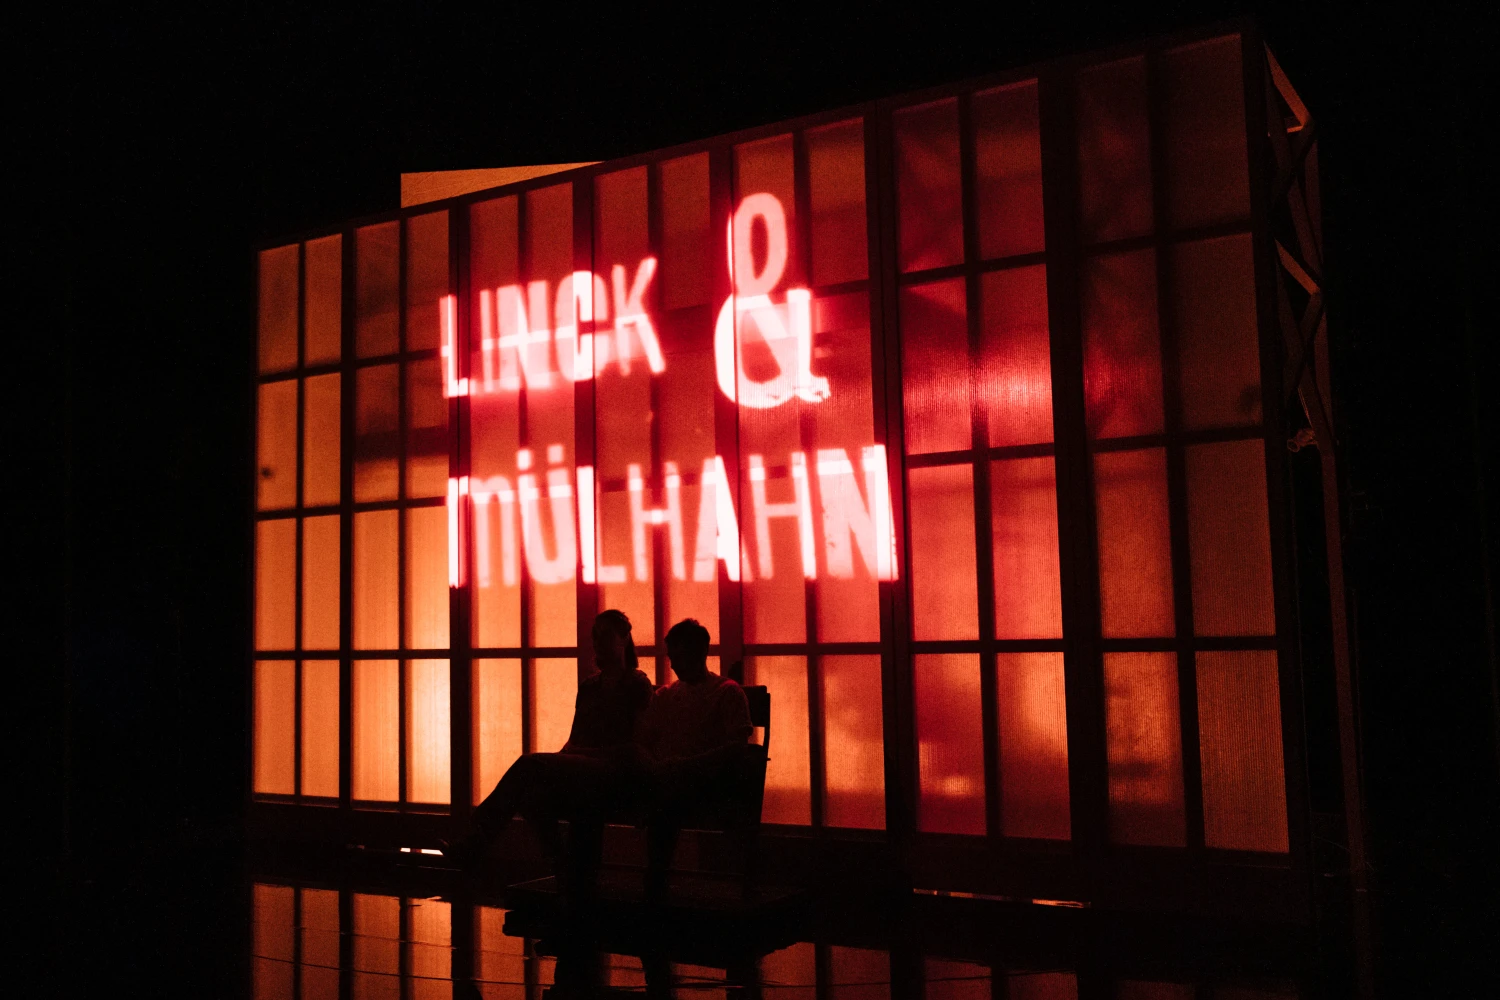 Linck & Mülhahn: What to expect - 3